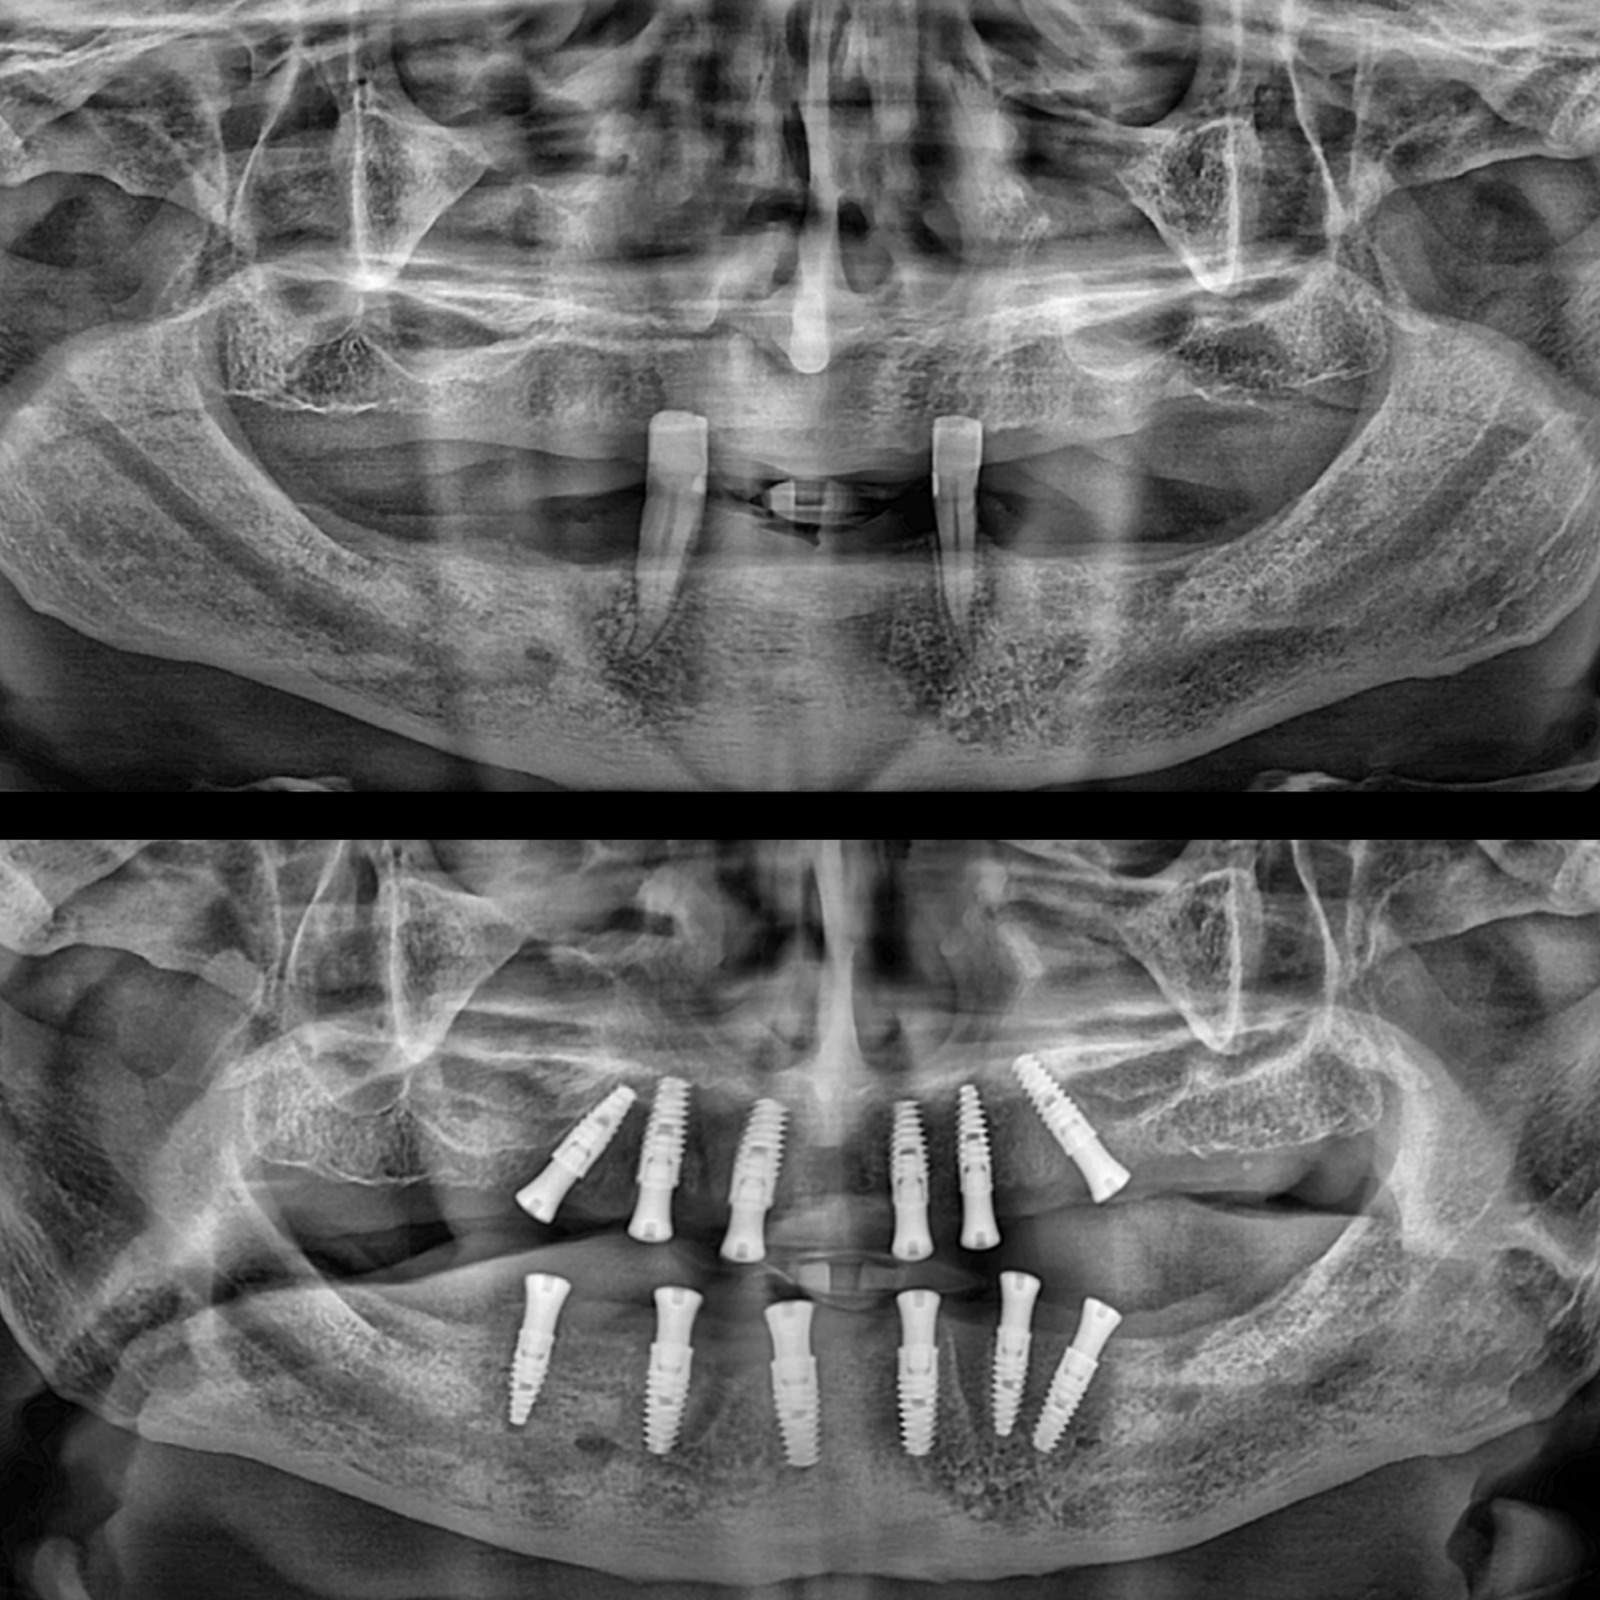 Oral and Maxillofacial Surgery (Extraction and Implant Applications)